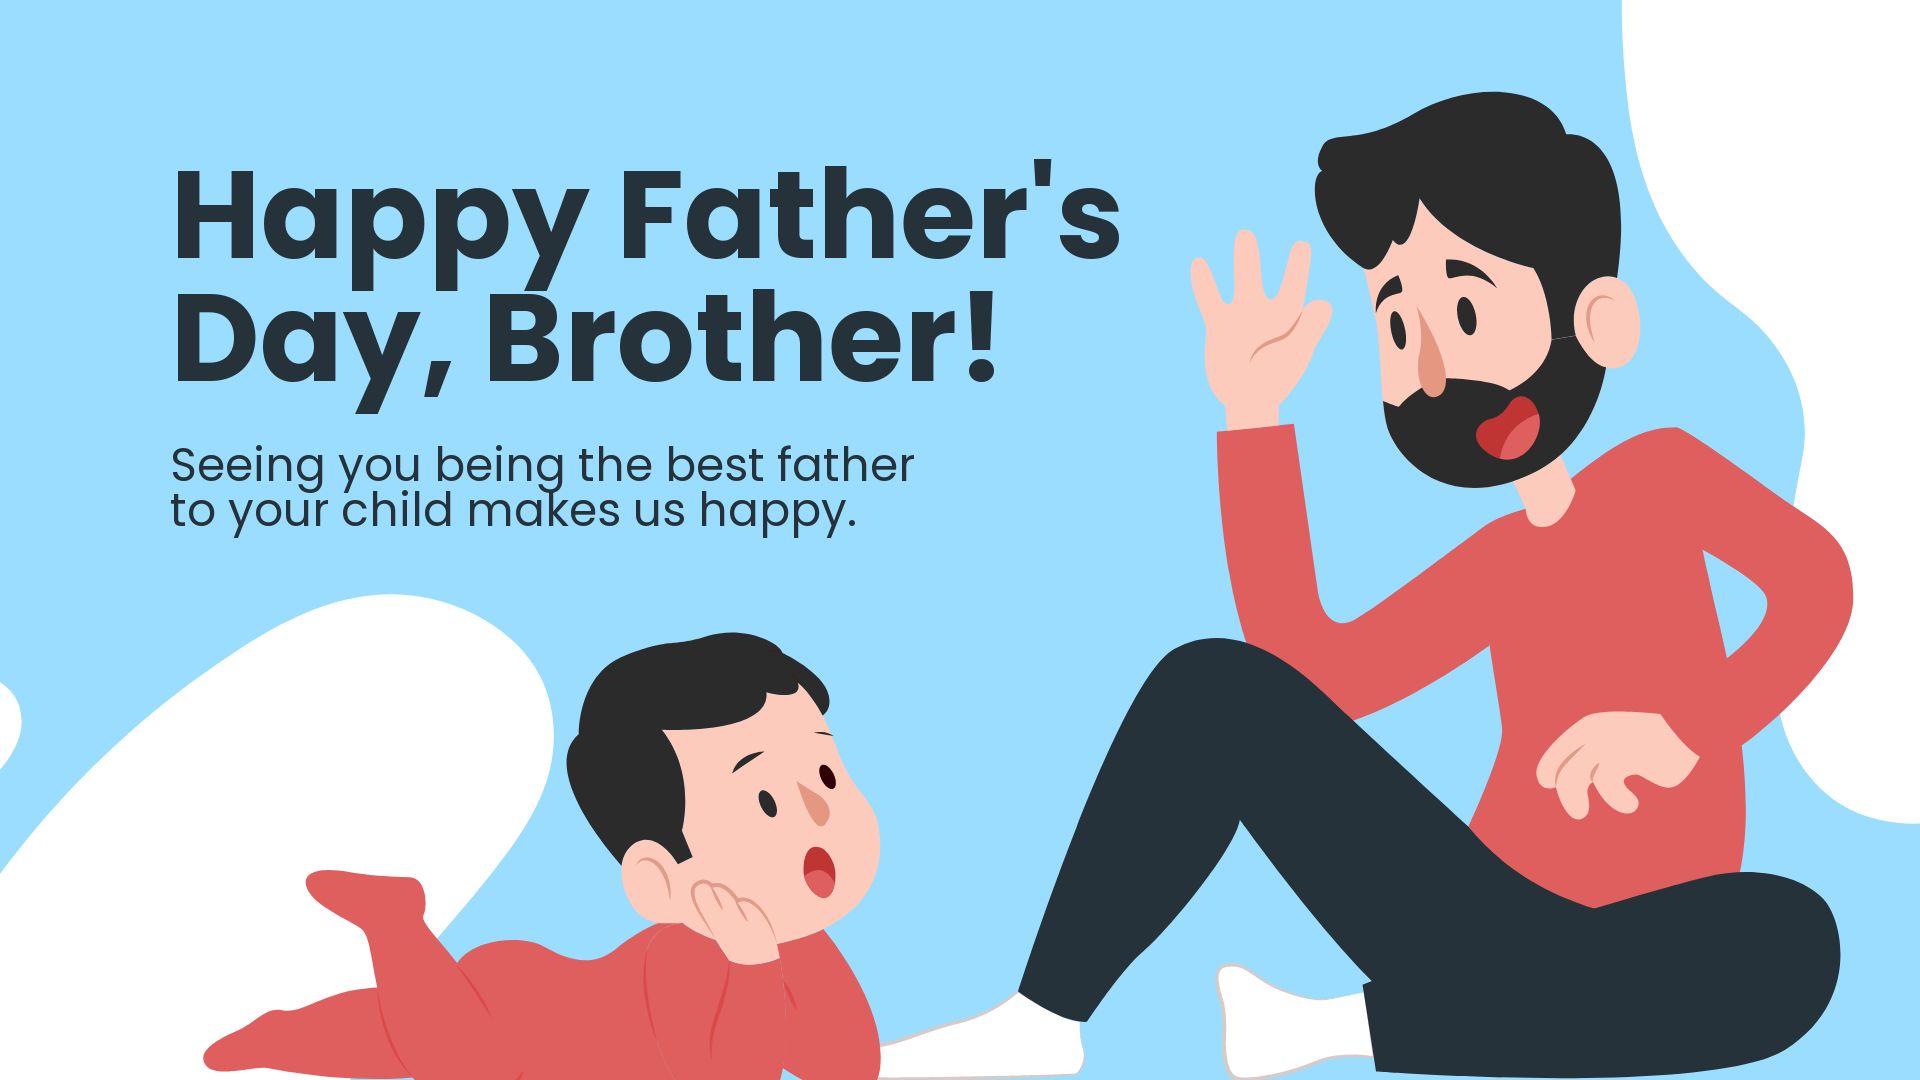 Free Happy Father's Day Brother Image in JPG